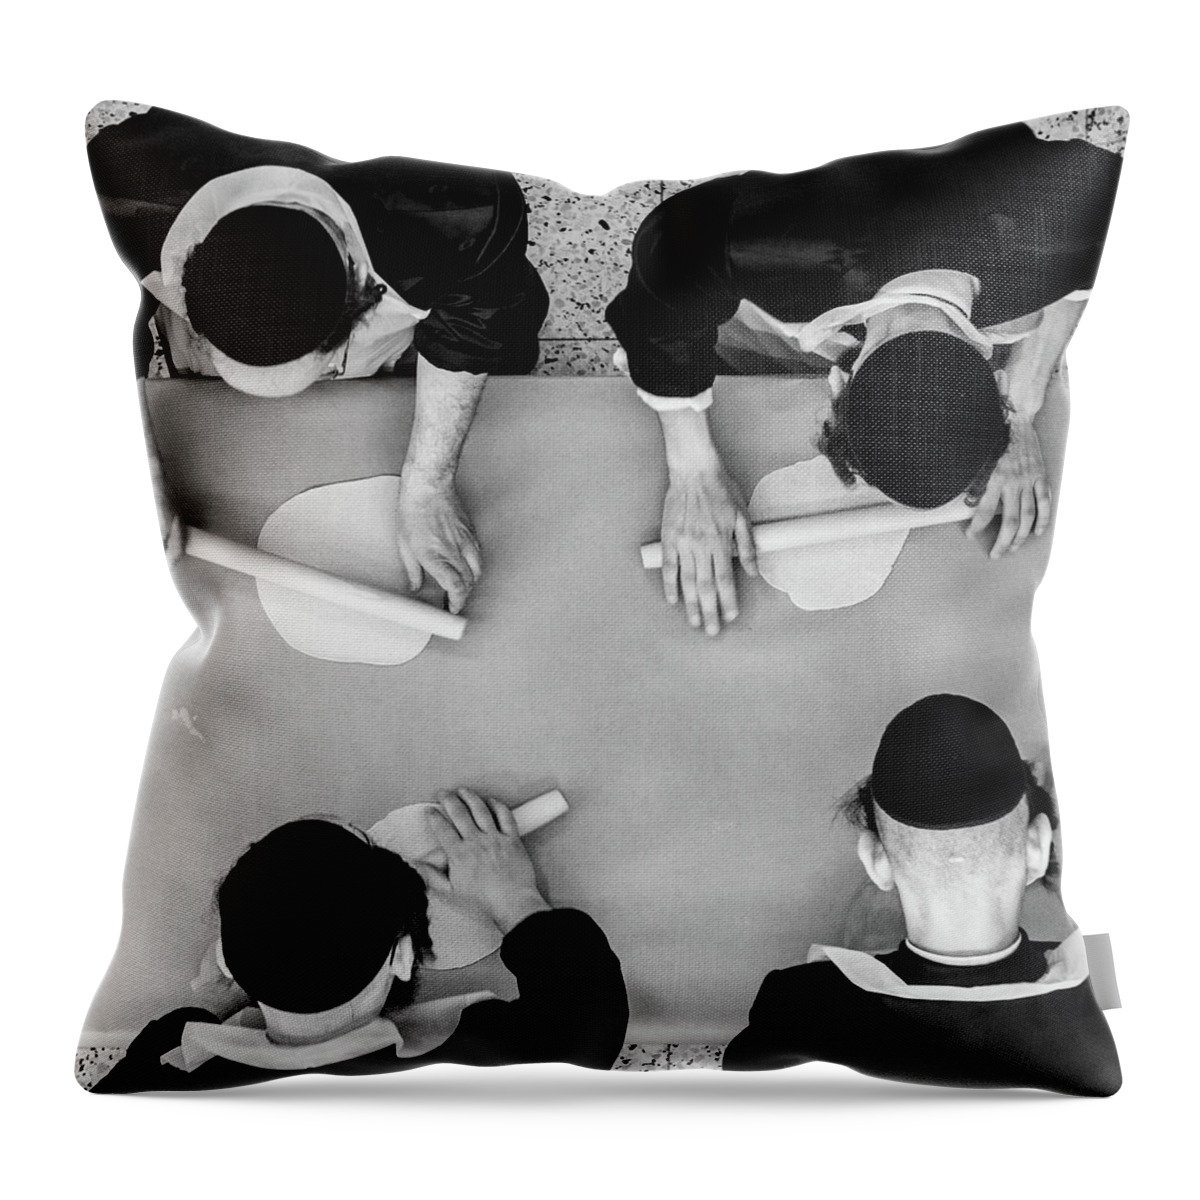 Working Throw Pillow featuring the photograph Making Matza by Guy Prives